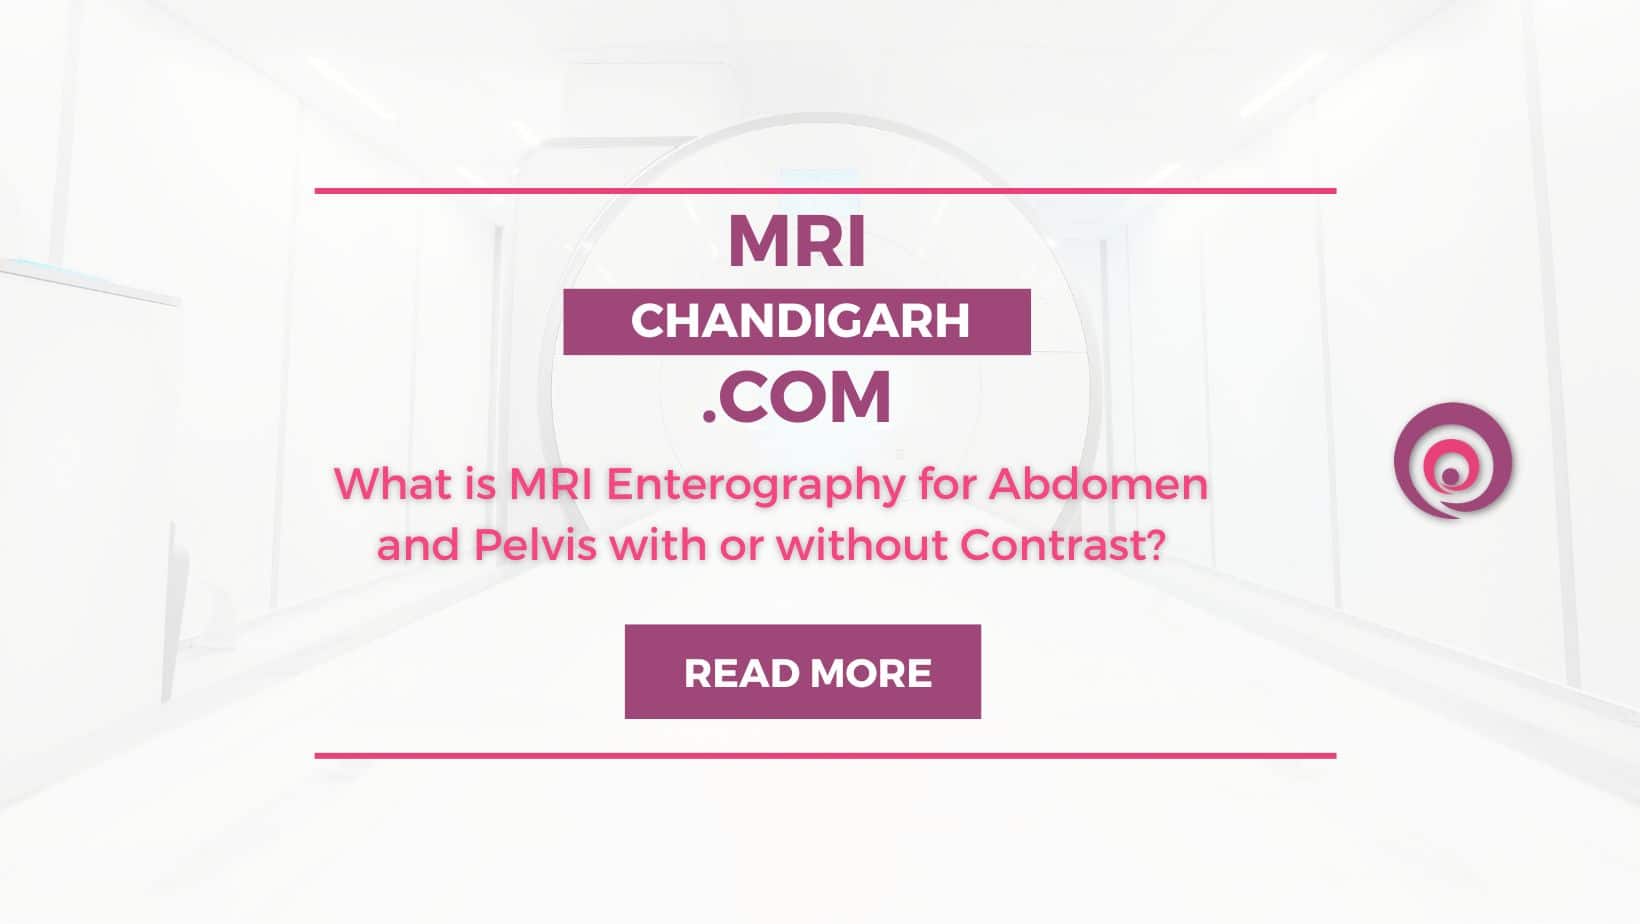 What is MRI Enterography for Abdomen and Pelvis with or without Contrast?